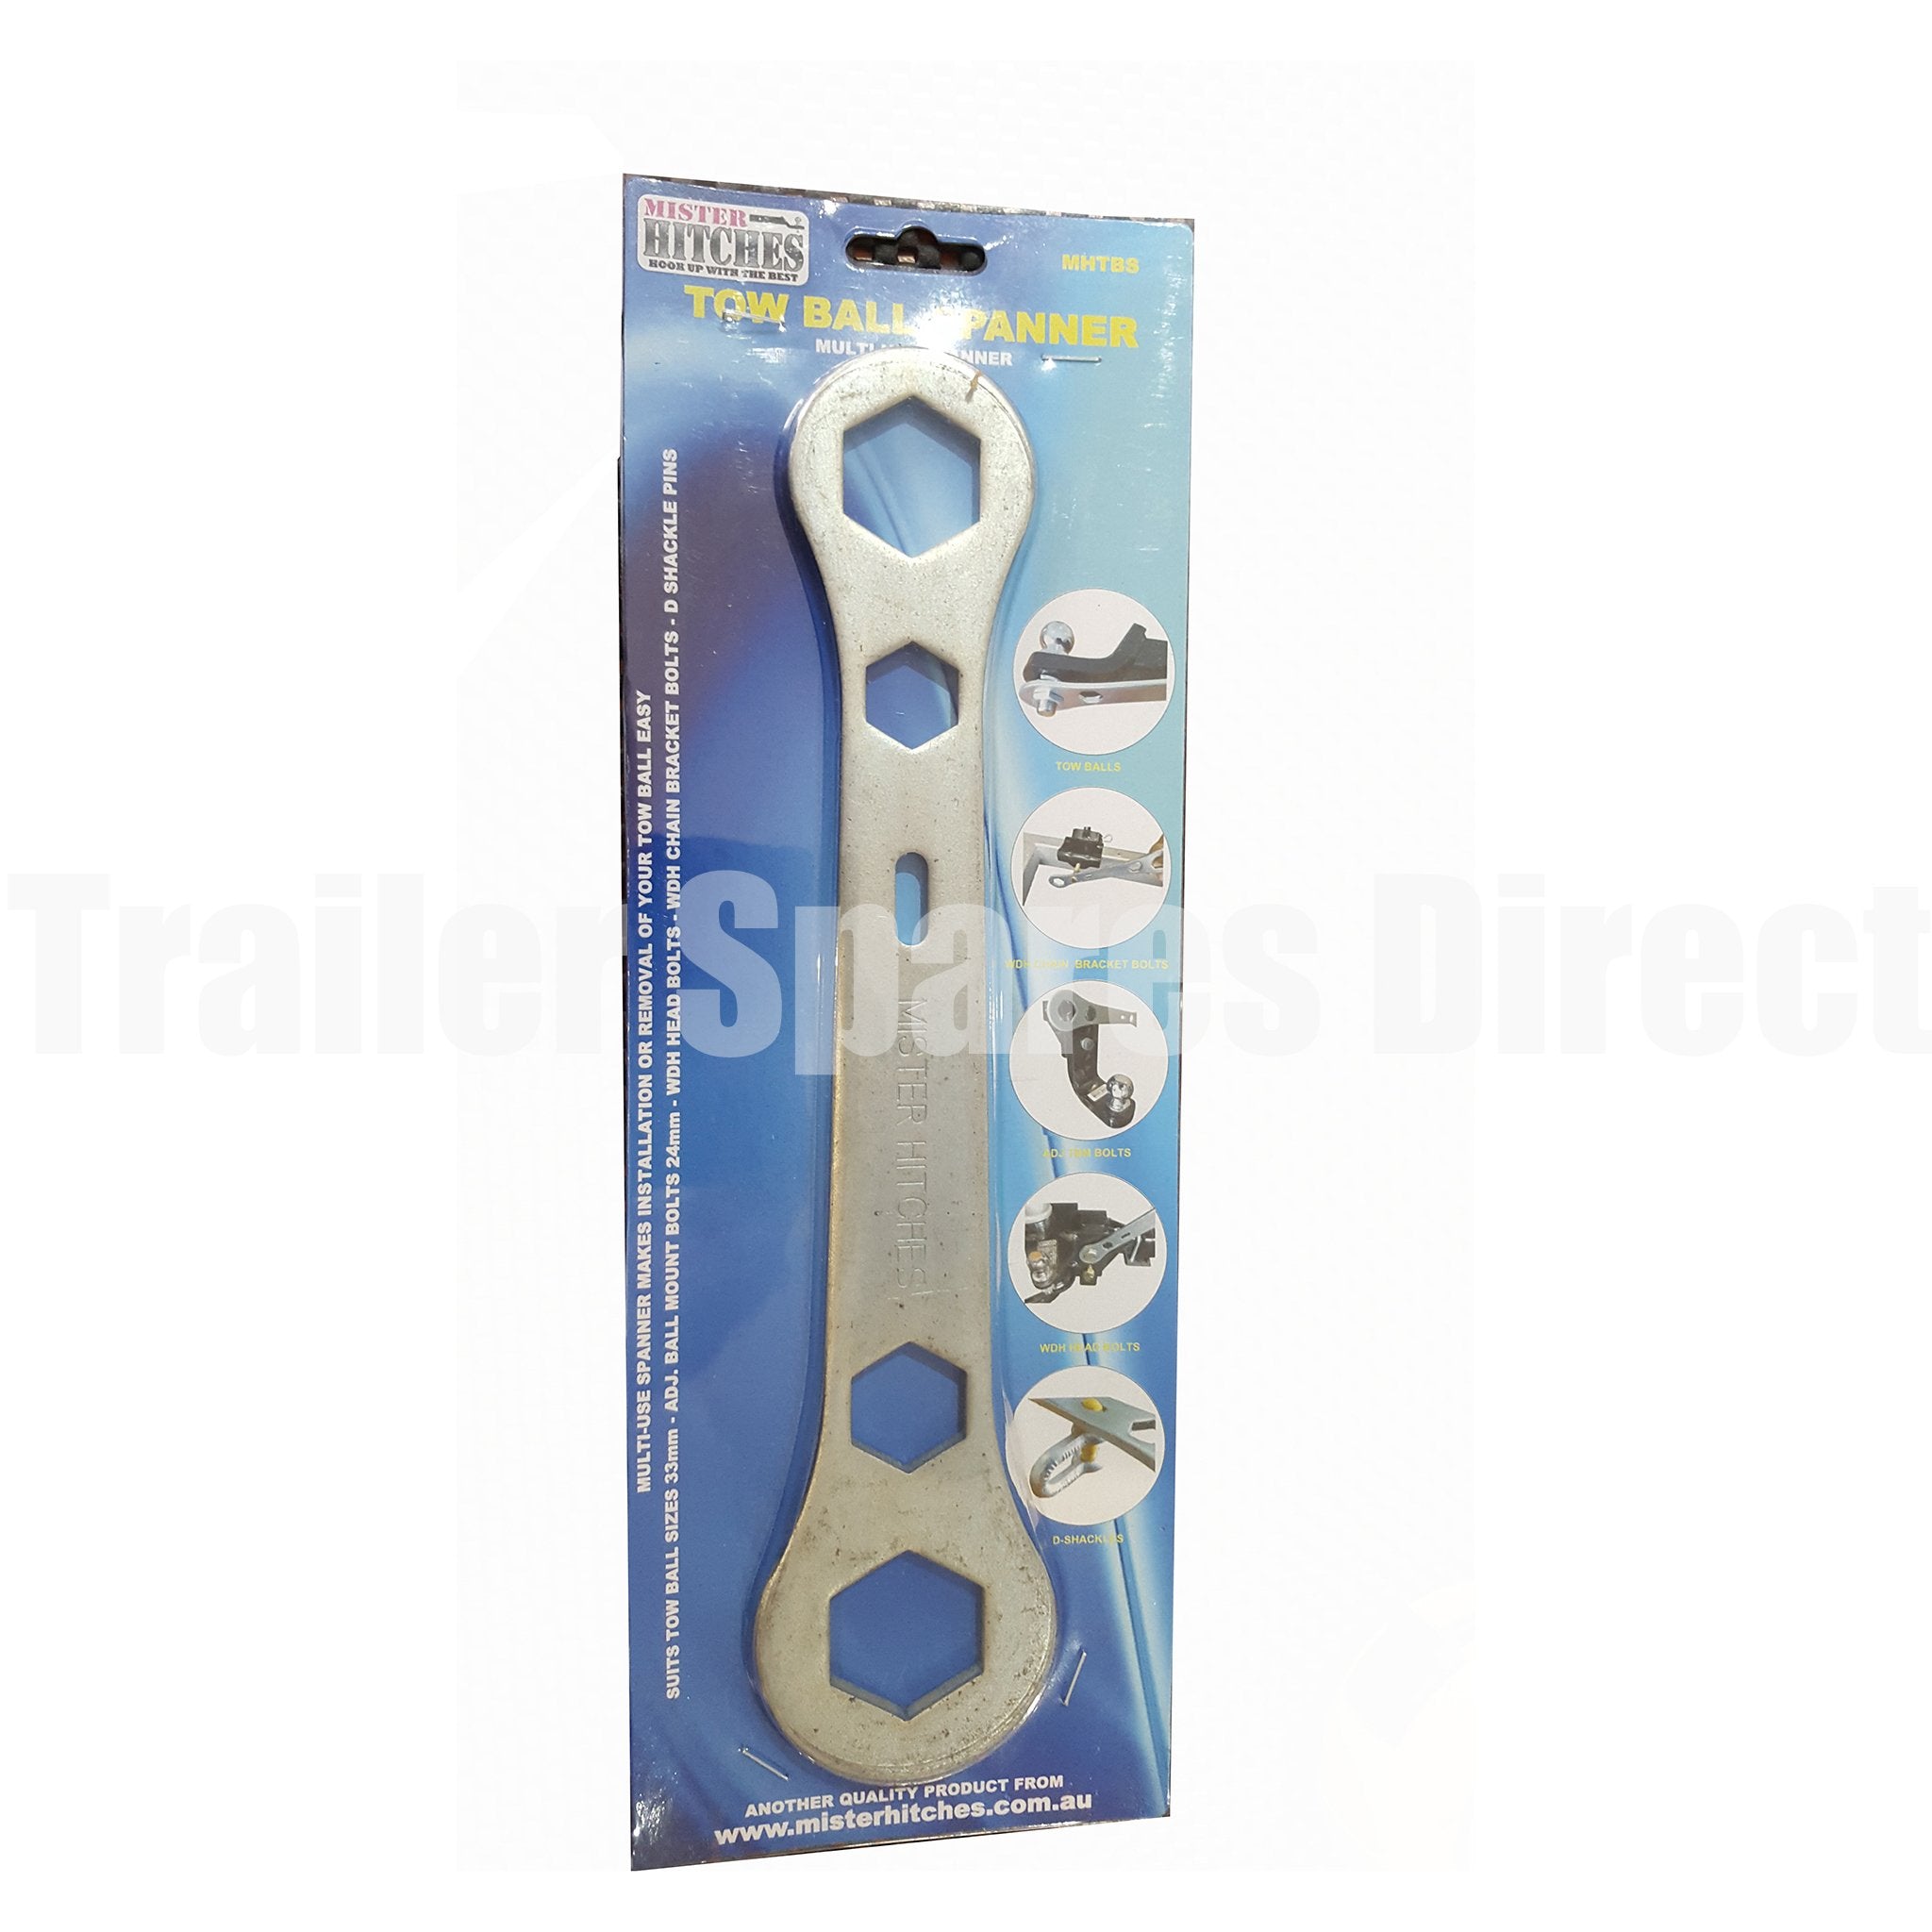 Mister Hitches tow ball spanner